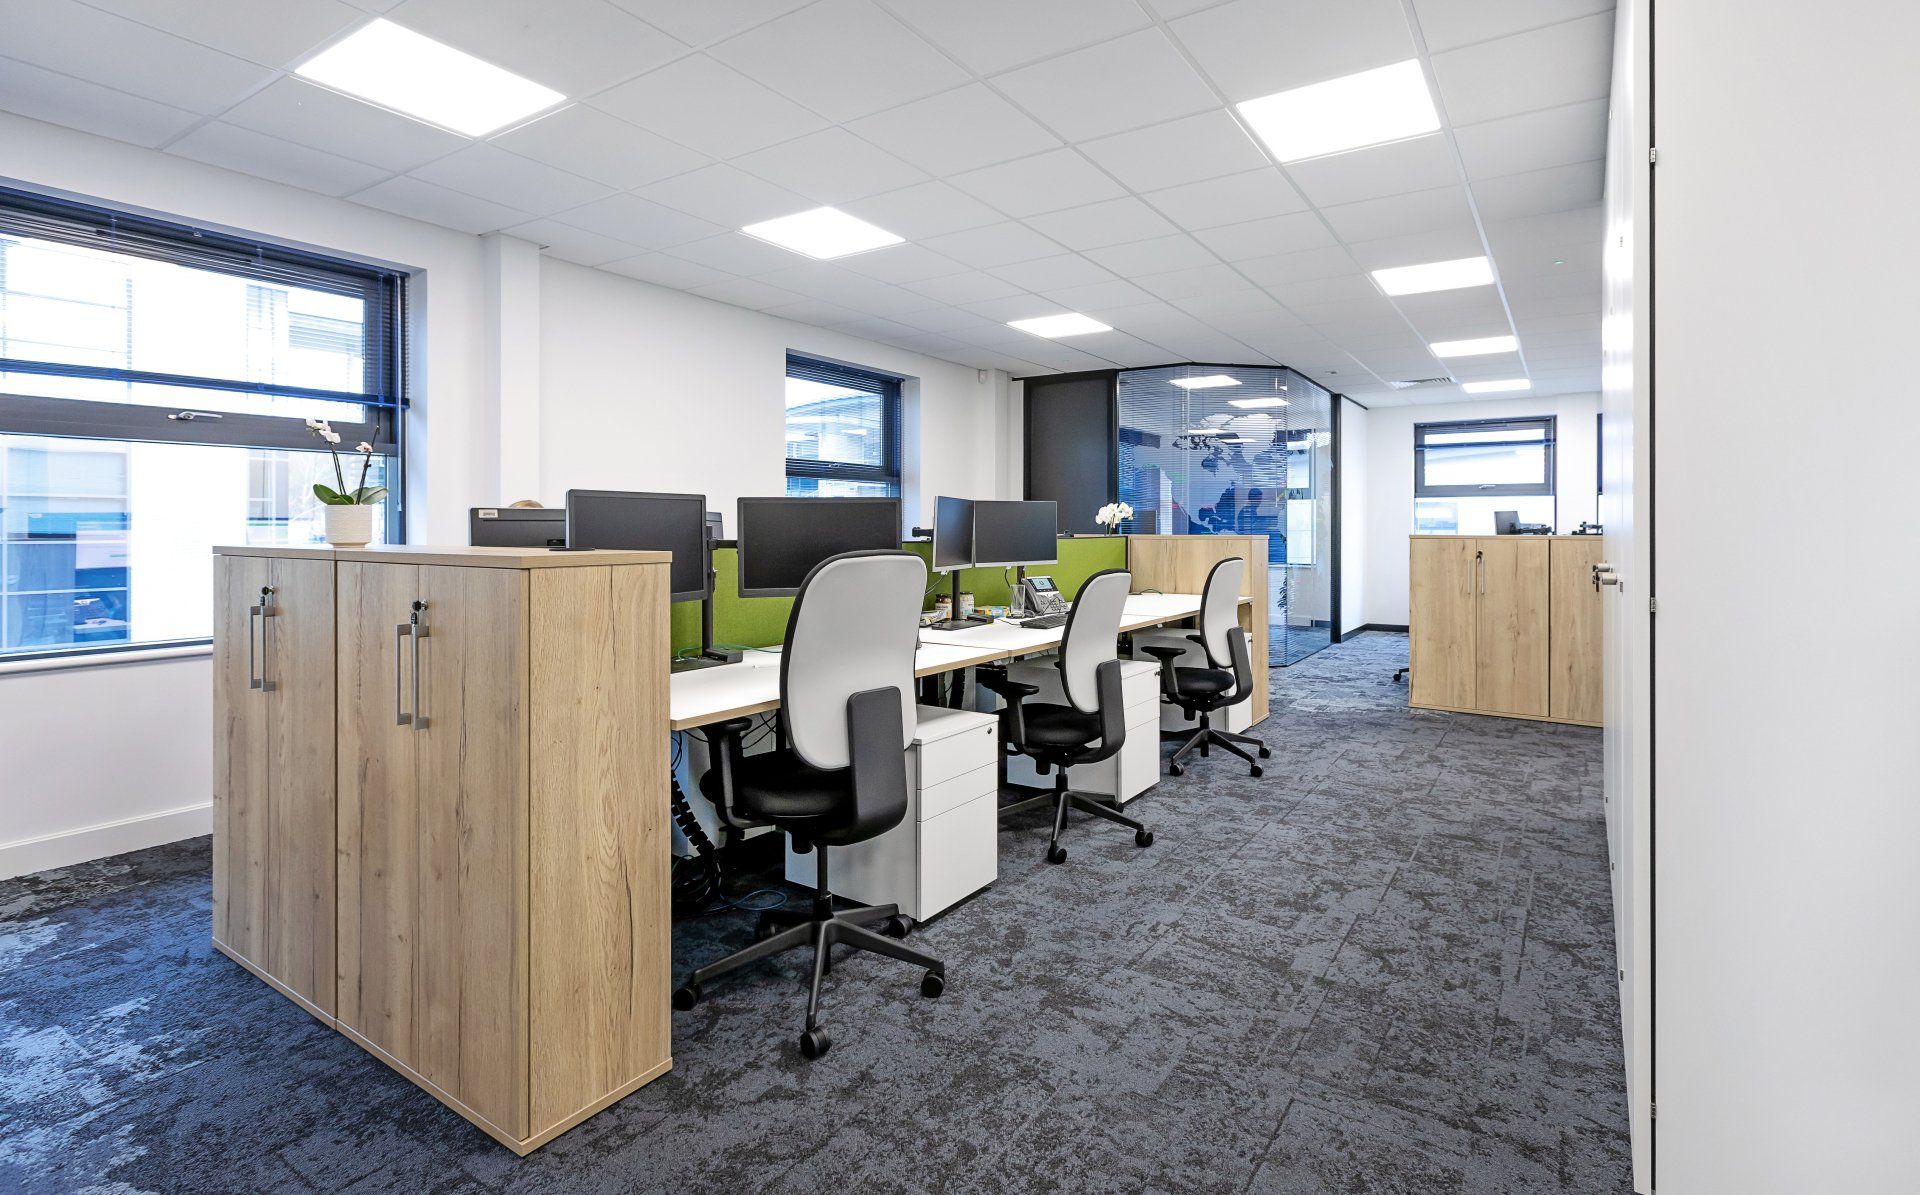 Food supplier office fit out